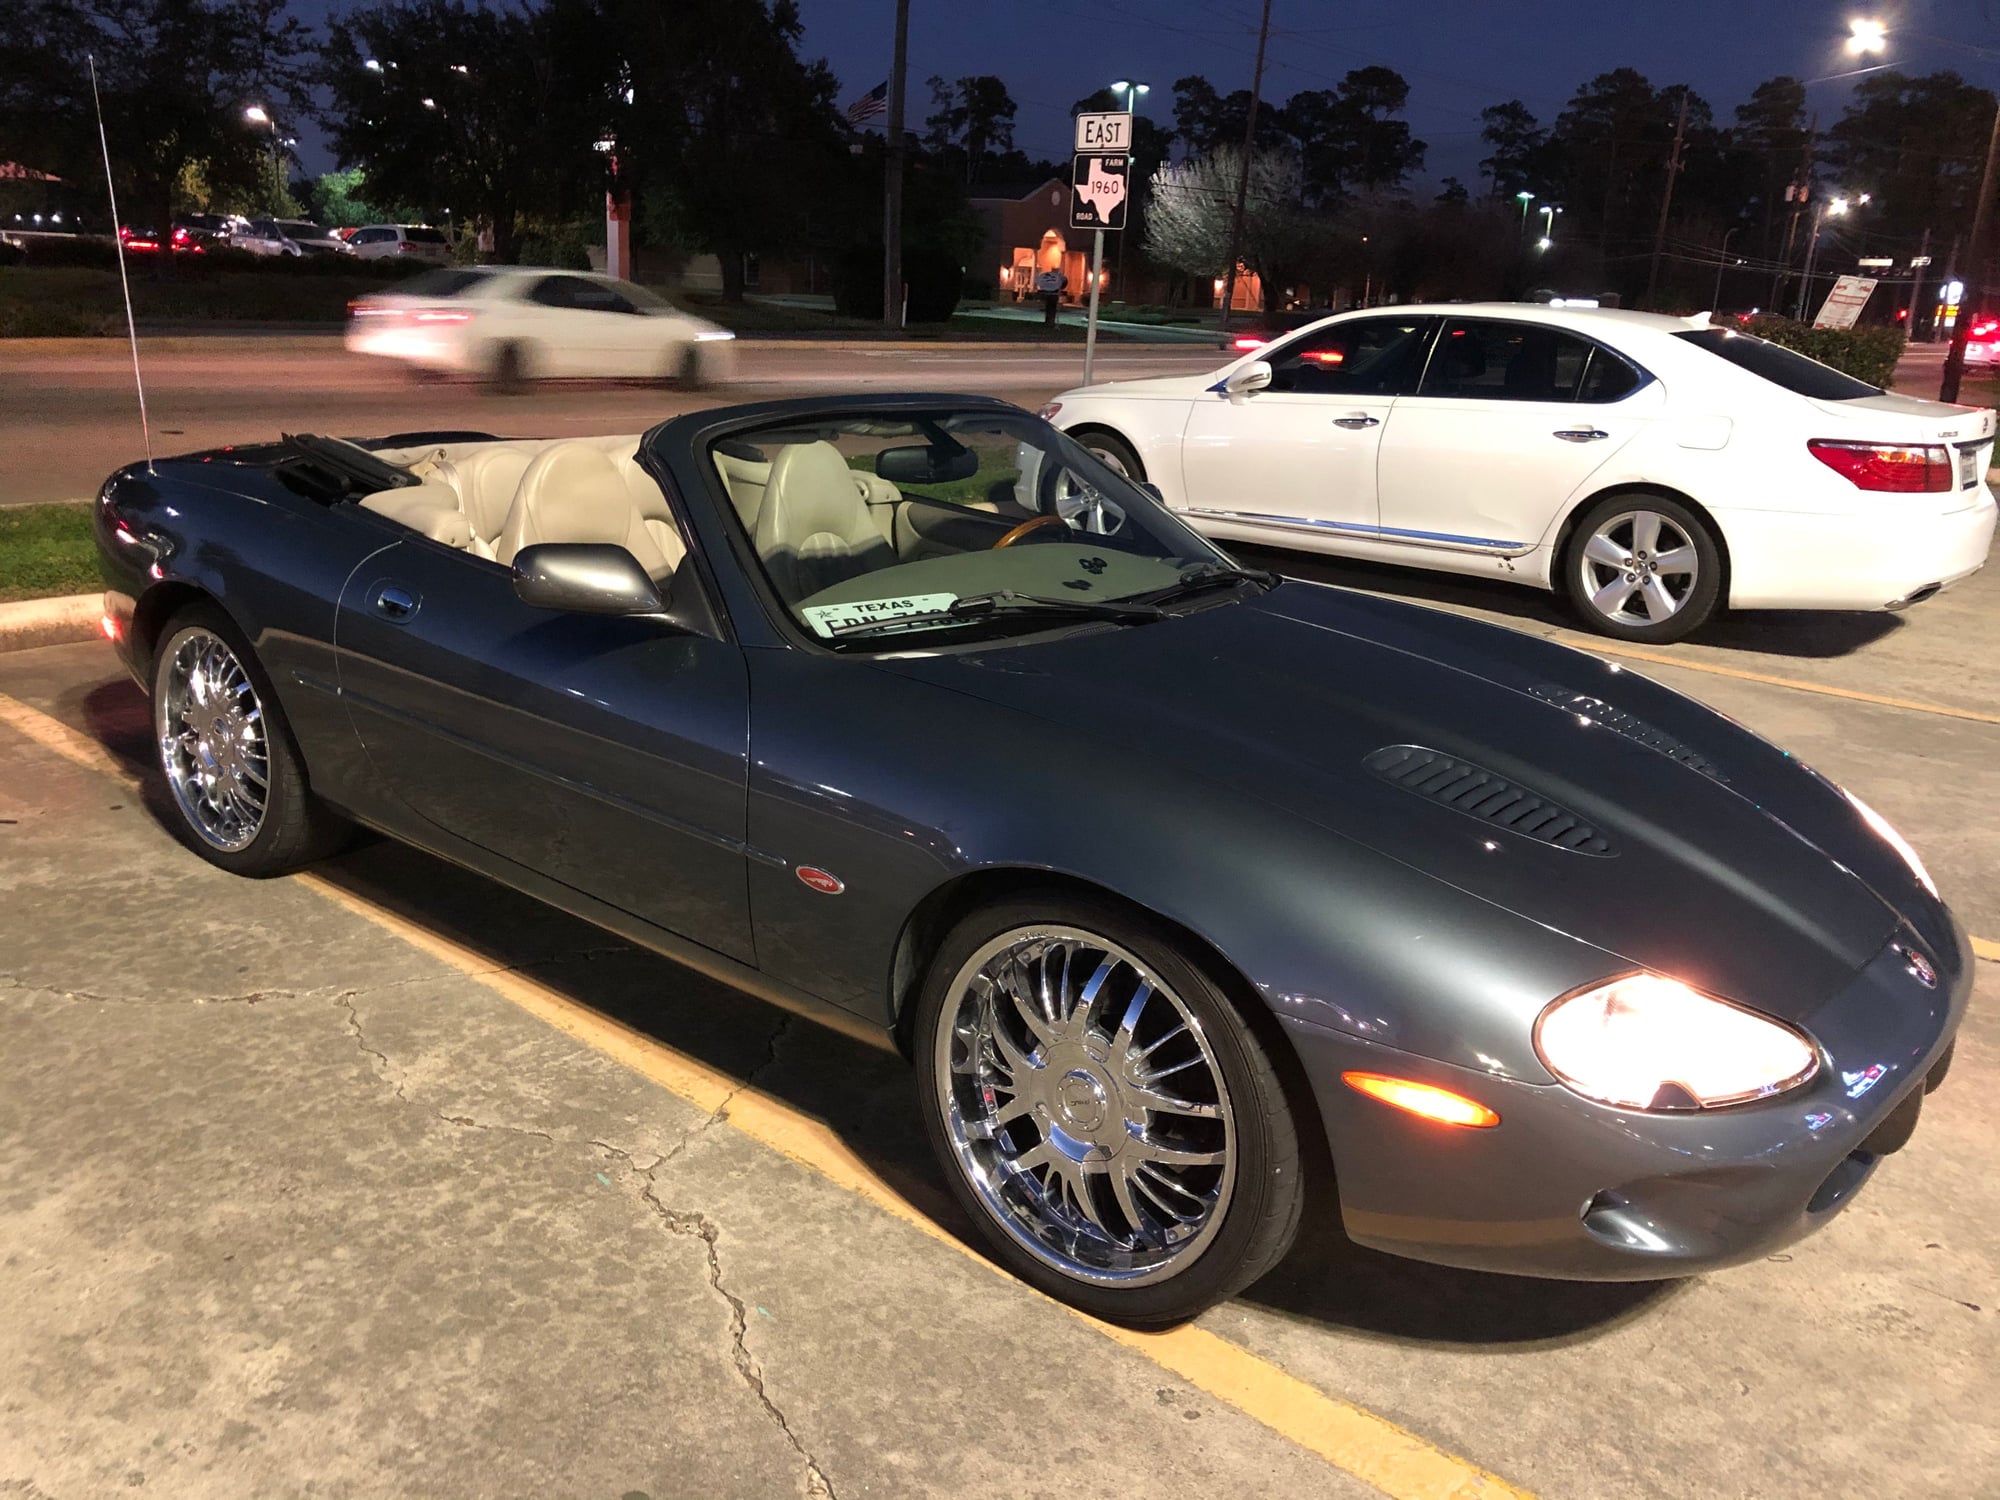 2000 Jaguar XKR - 2000 XKR convertible - Used - VIN SAJJA42B8YPA00665 - 119,000 Miles - 8 cyl - 2WD - Automatic - Convertible - Other - Houston, TX 77069, United States